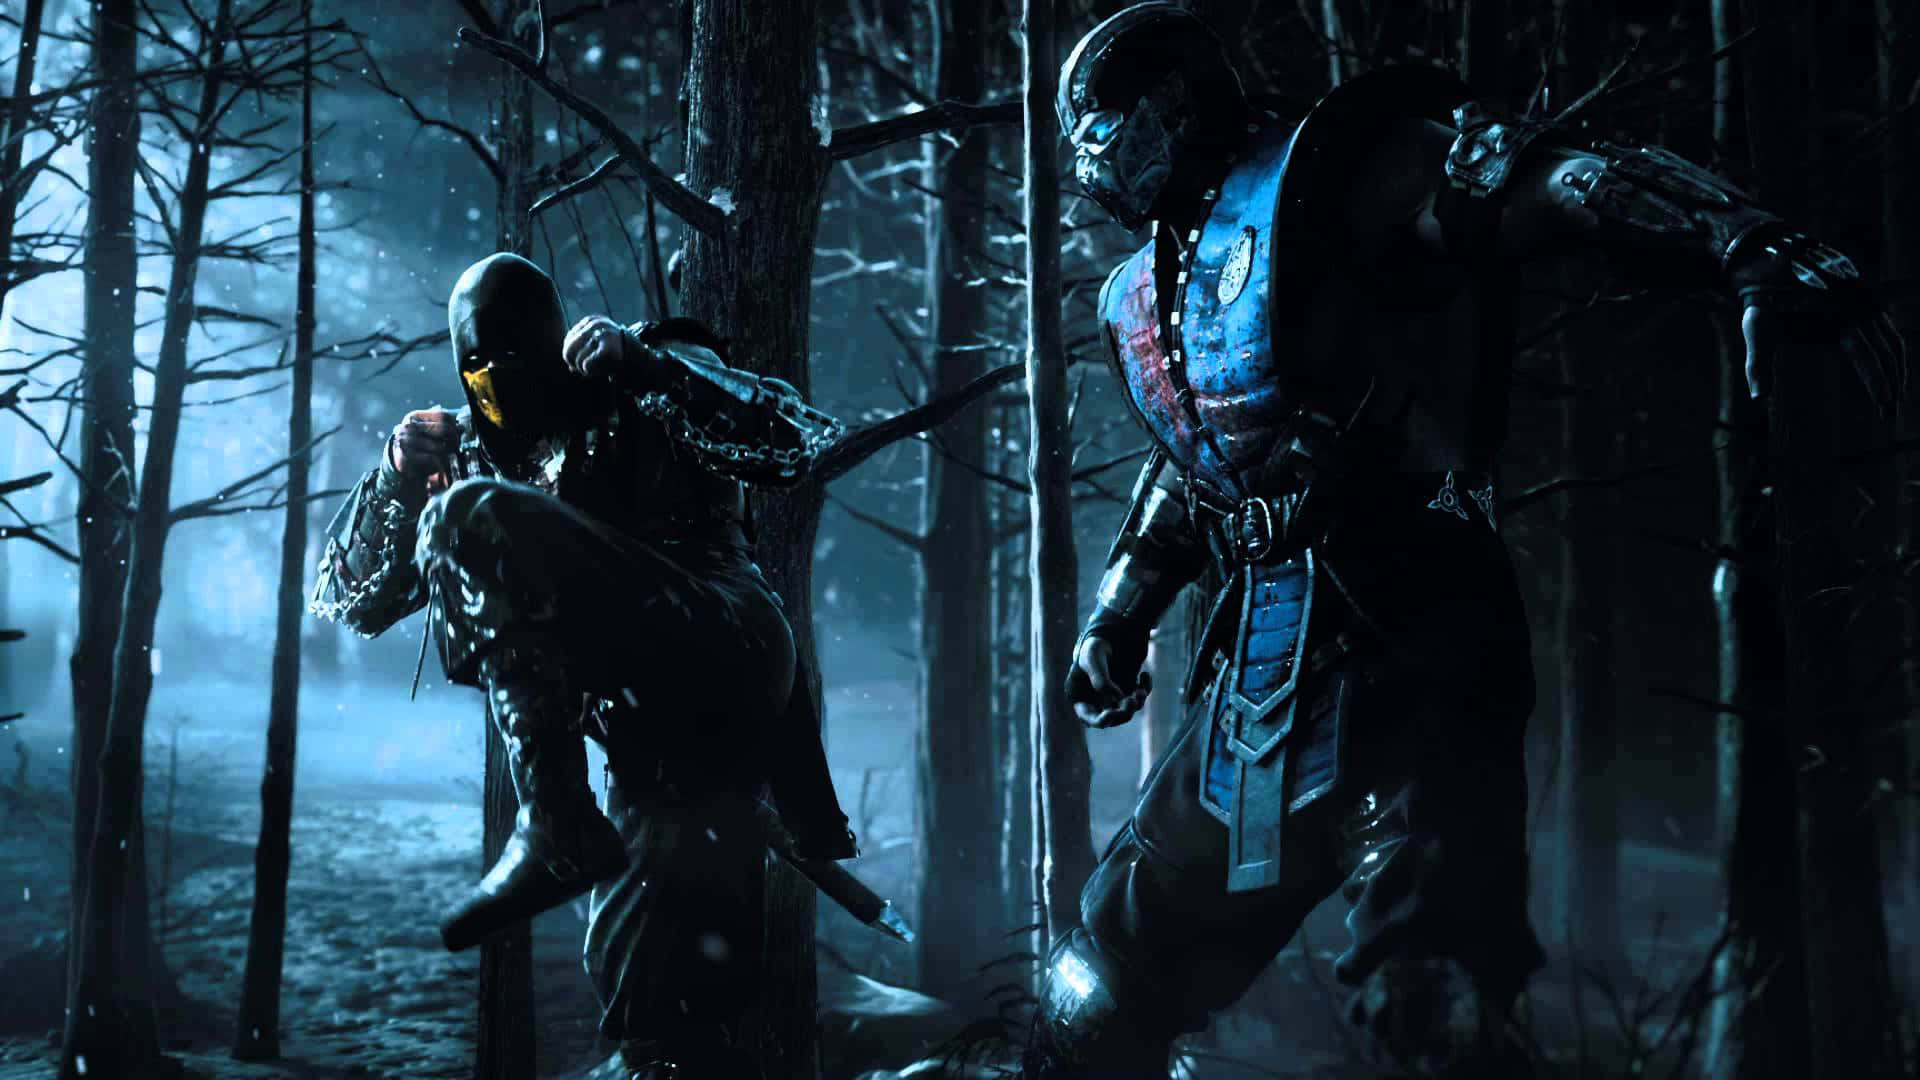 Epic Mortal Kombat X Wallpaper: Iconic Fighters In Action Background